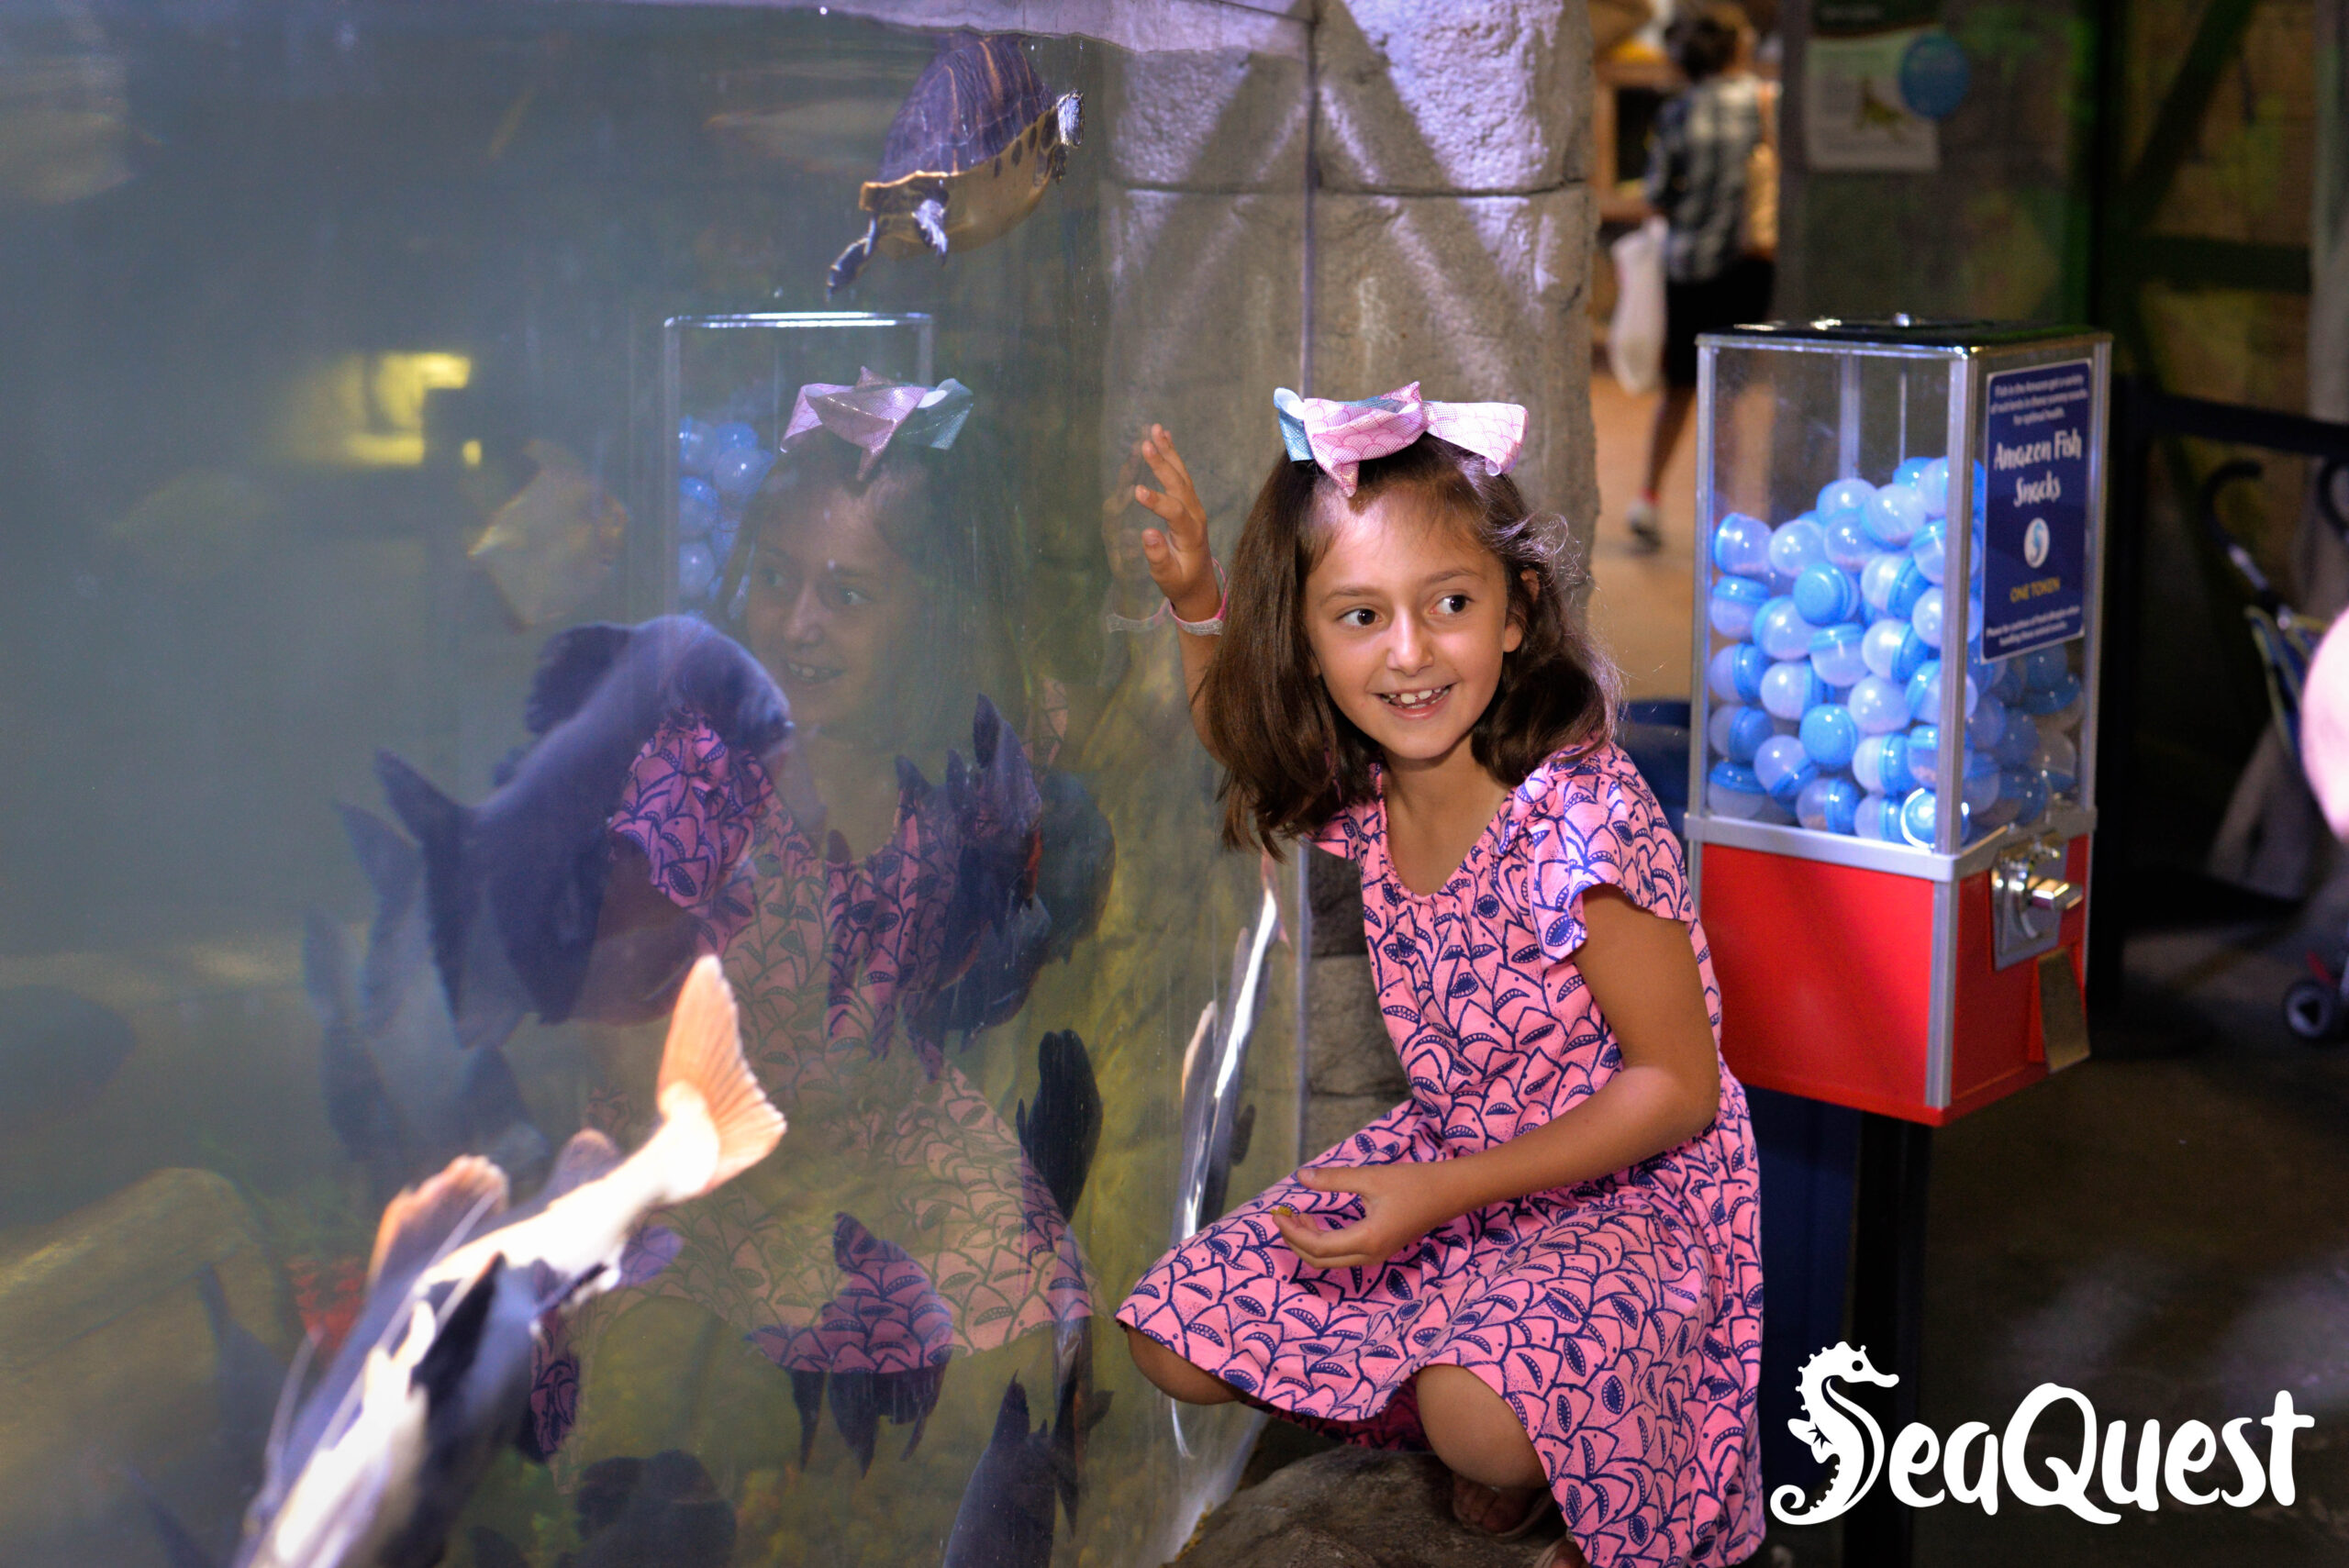 Girl feeds fish at SeaQuest